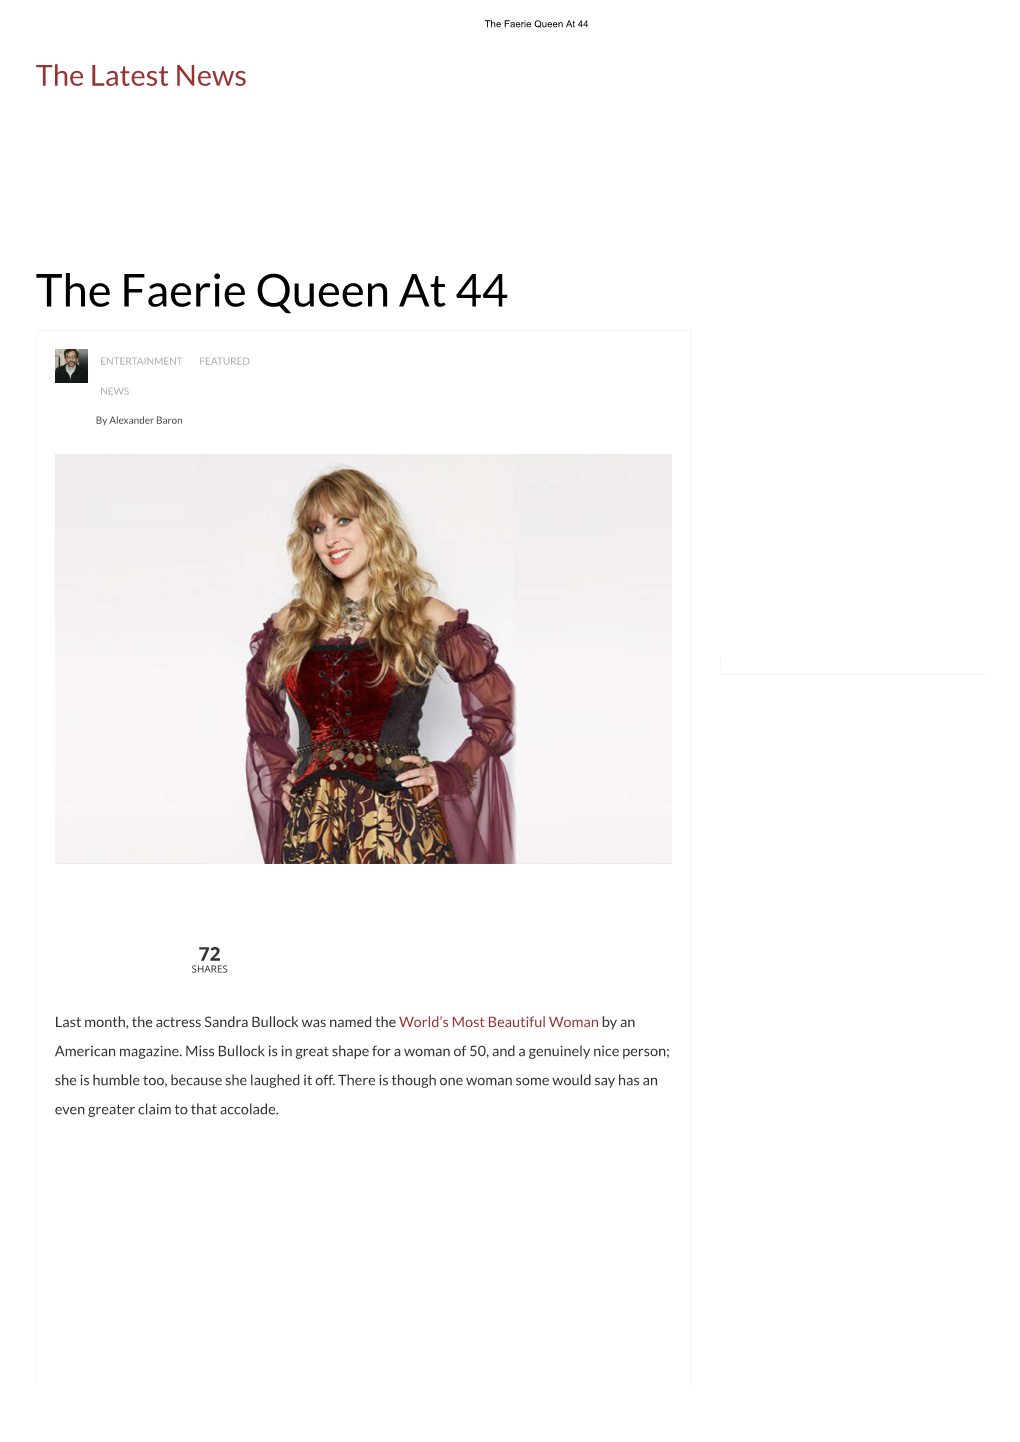 The Faerie Queen at 44